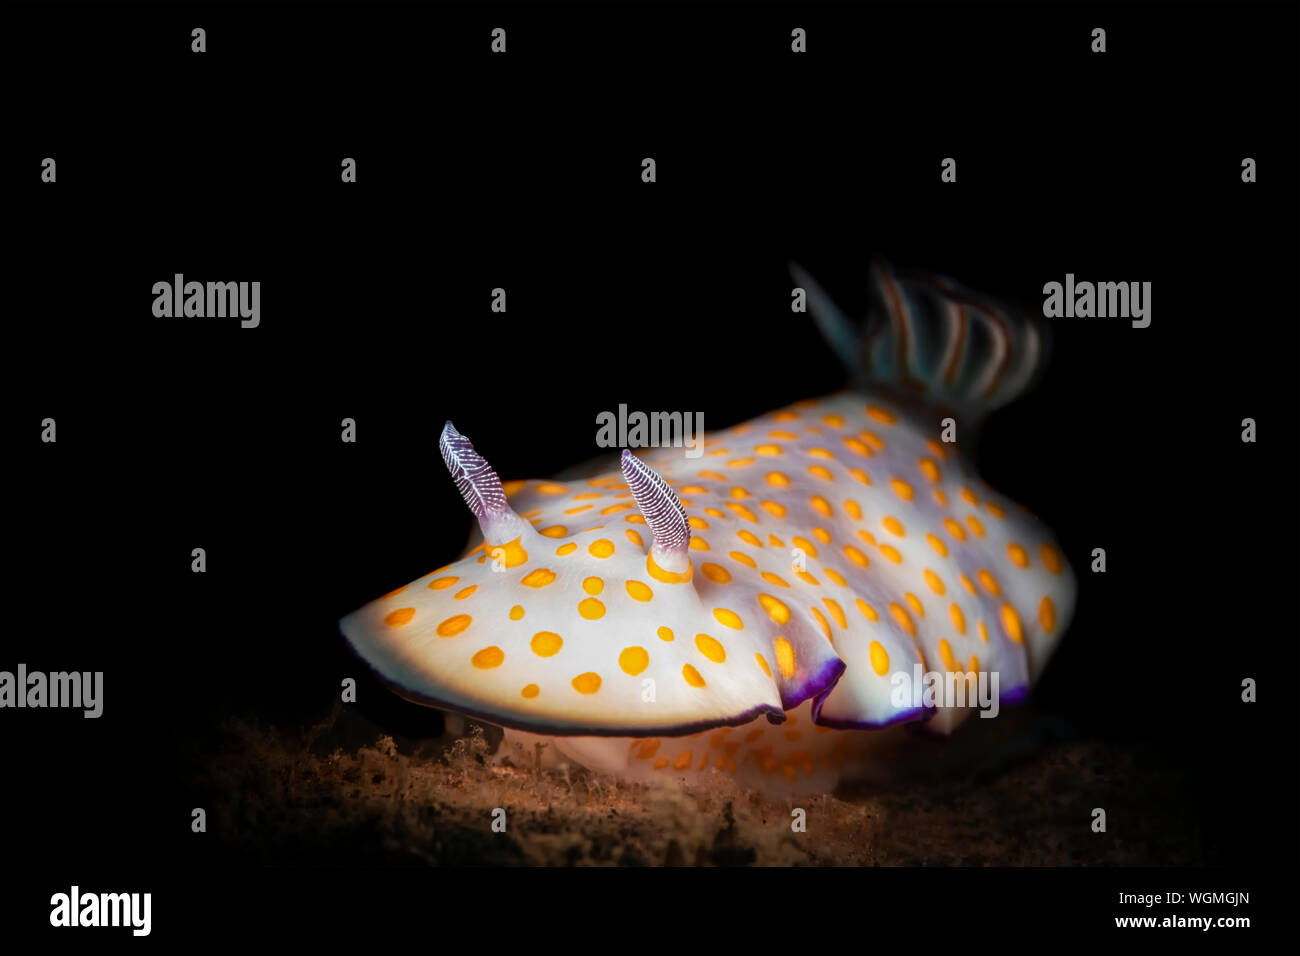 A colorful white gypsy nudibranch crawls across the sandy bottom at night. Stock Photo